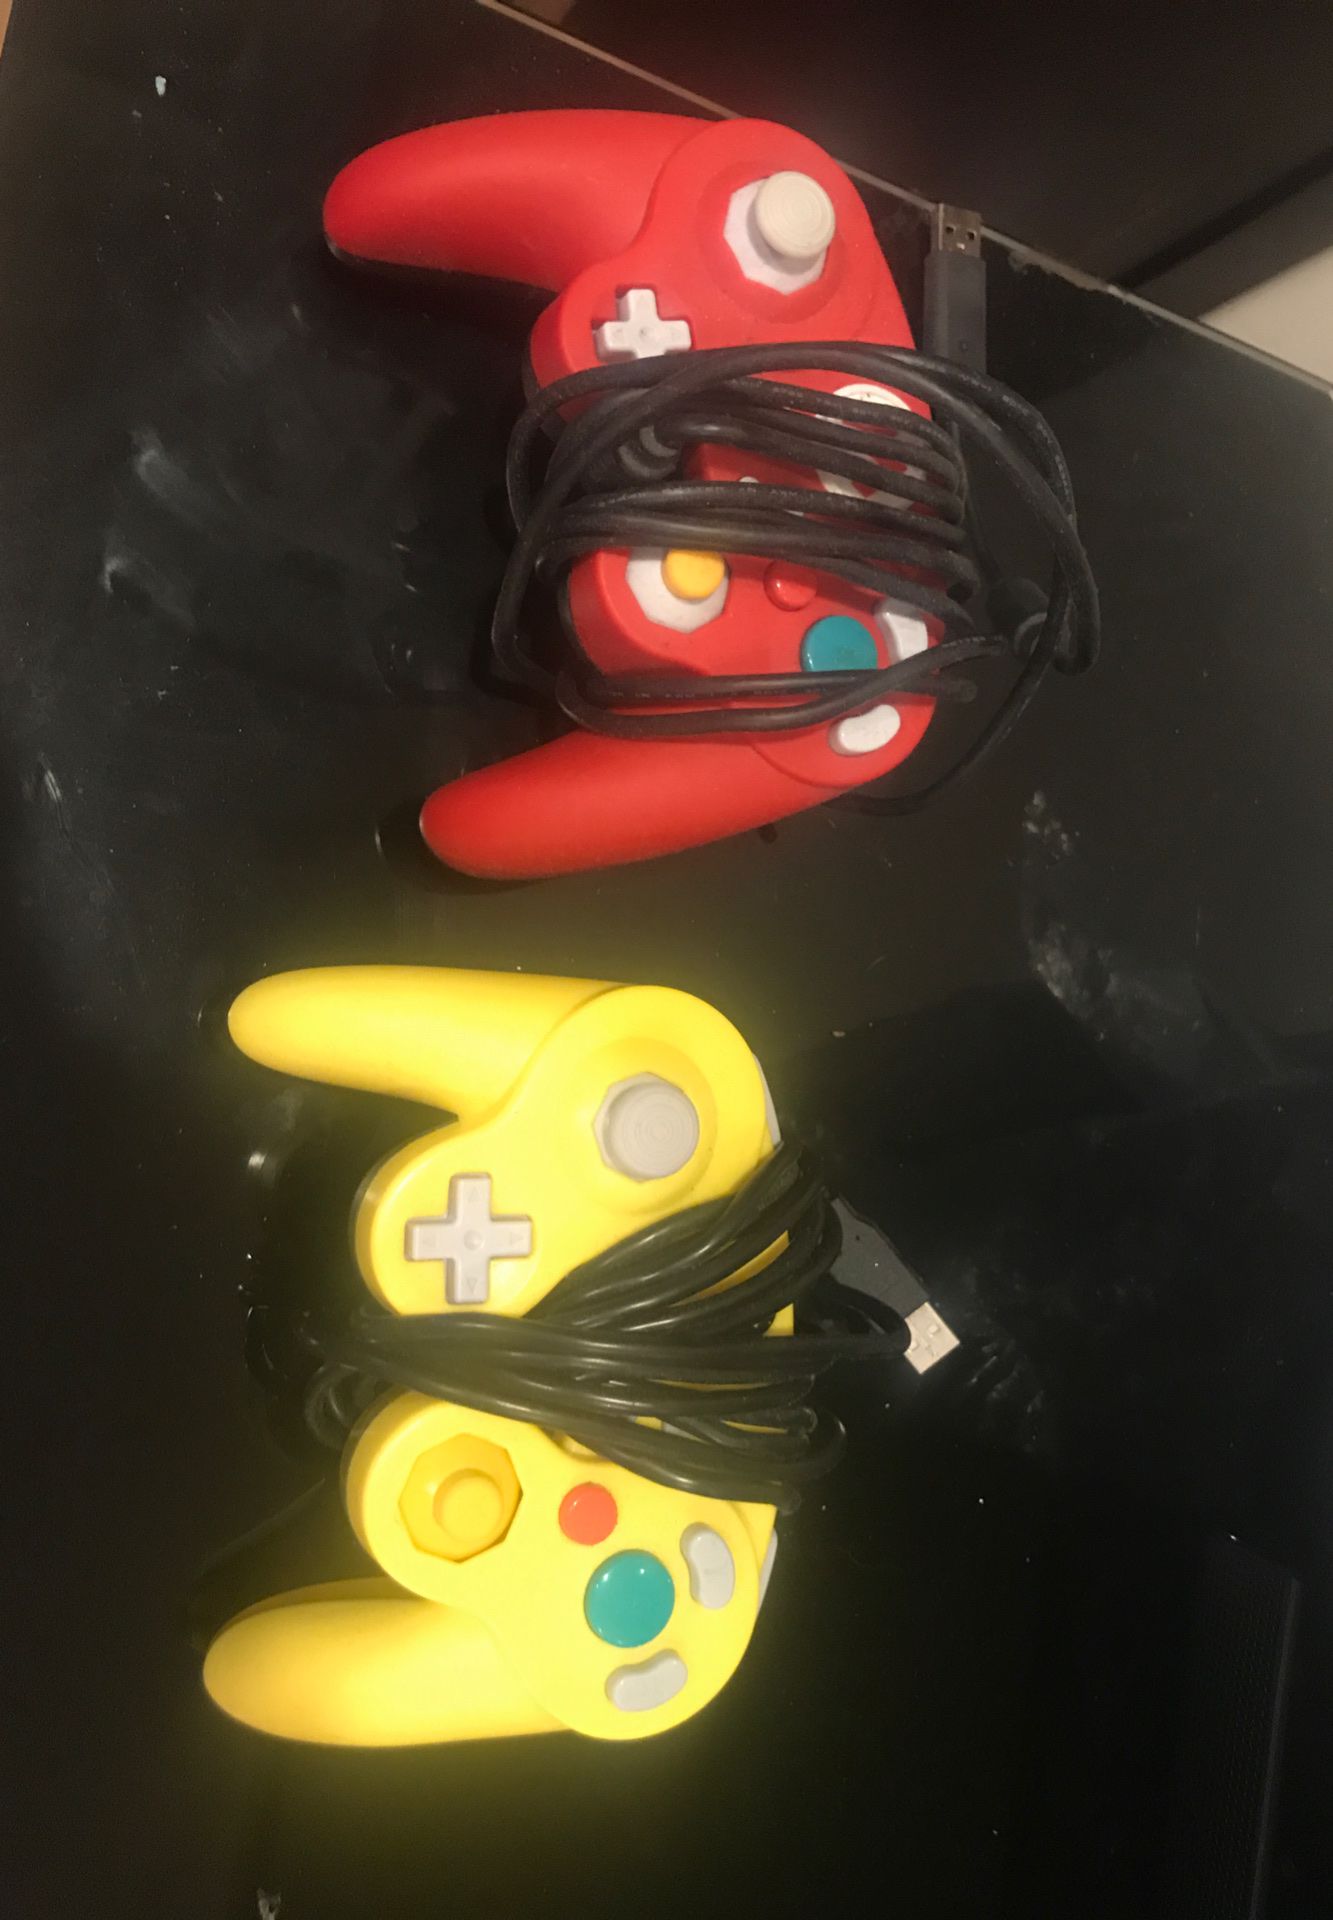 Like new Nintendo switch controllers